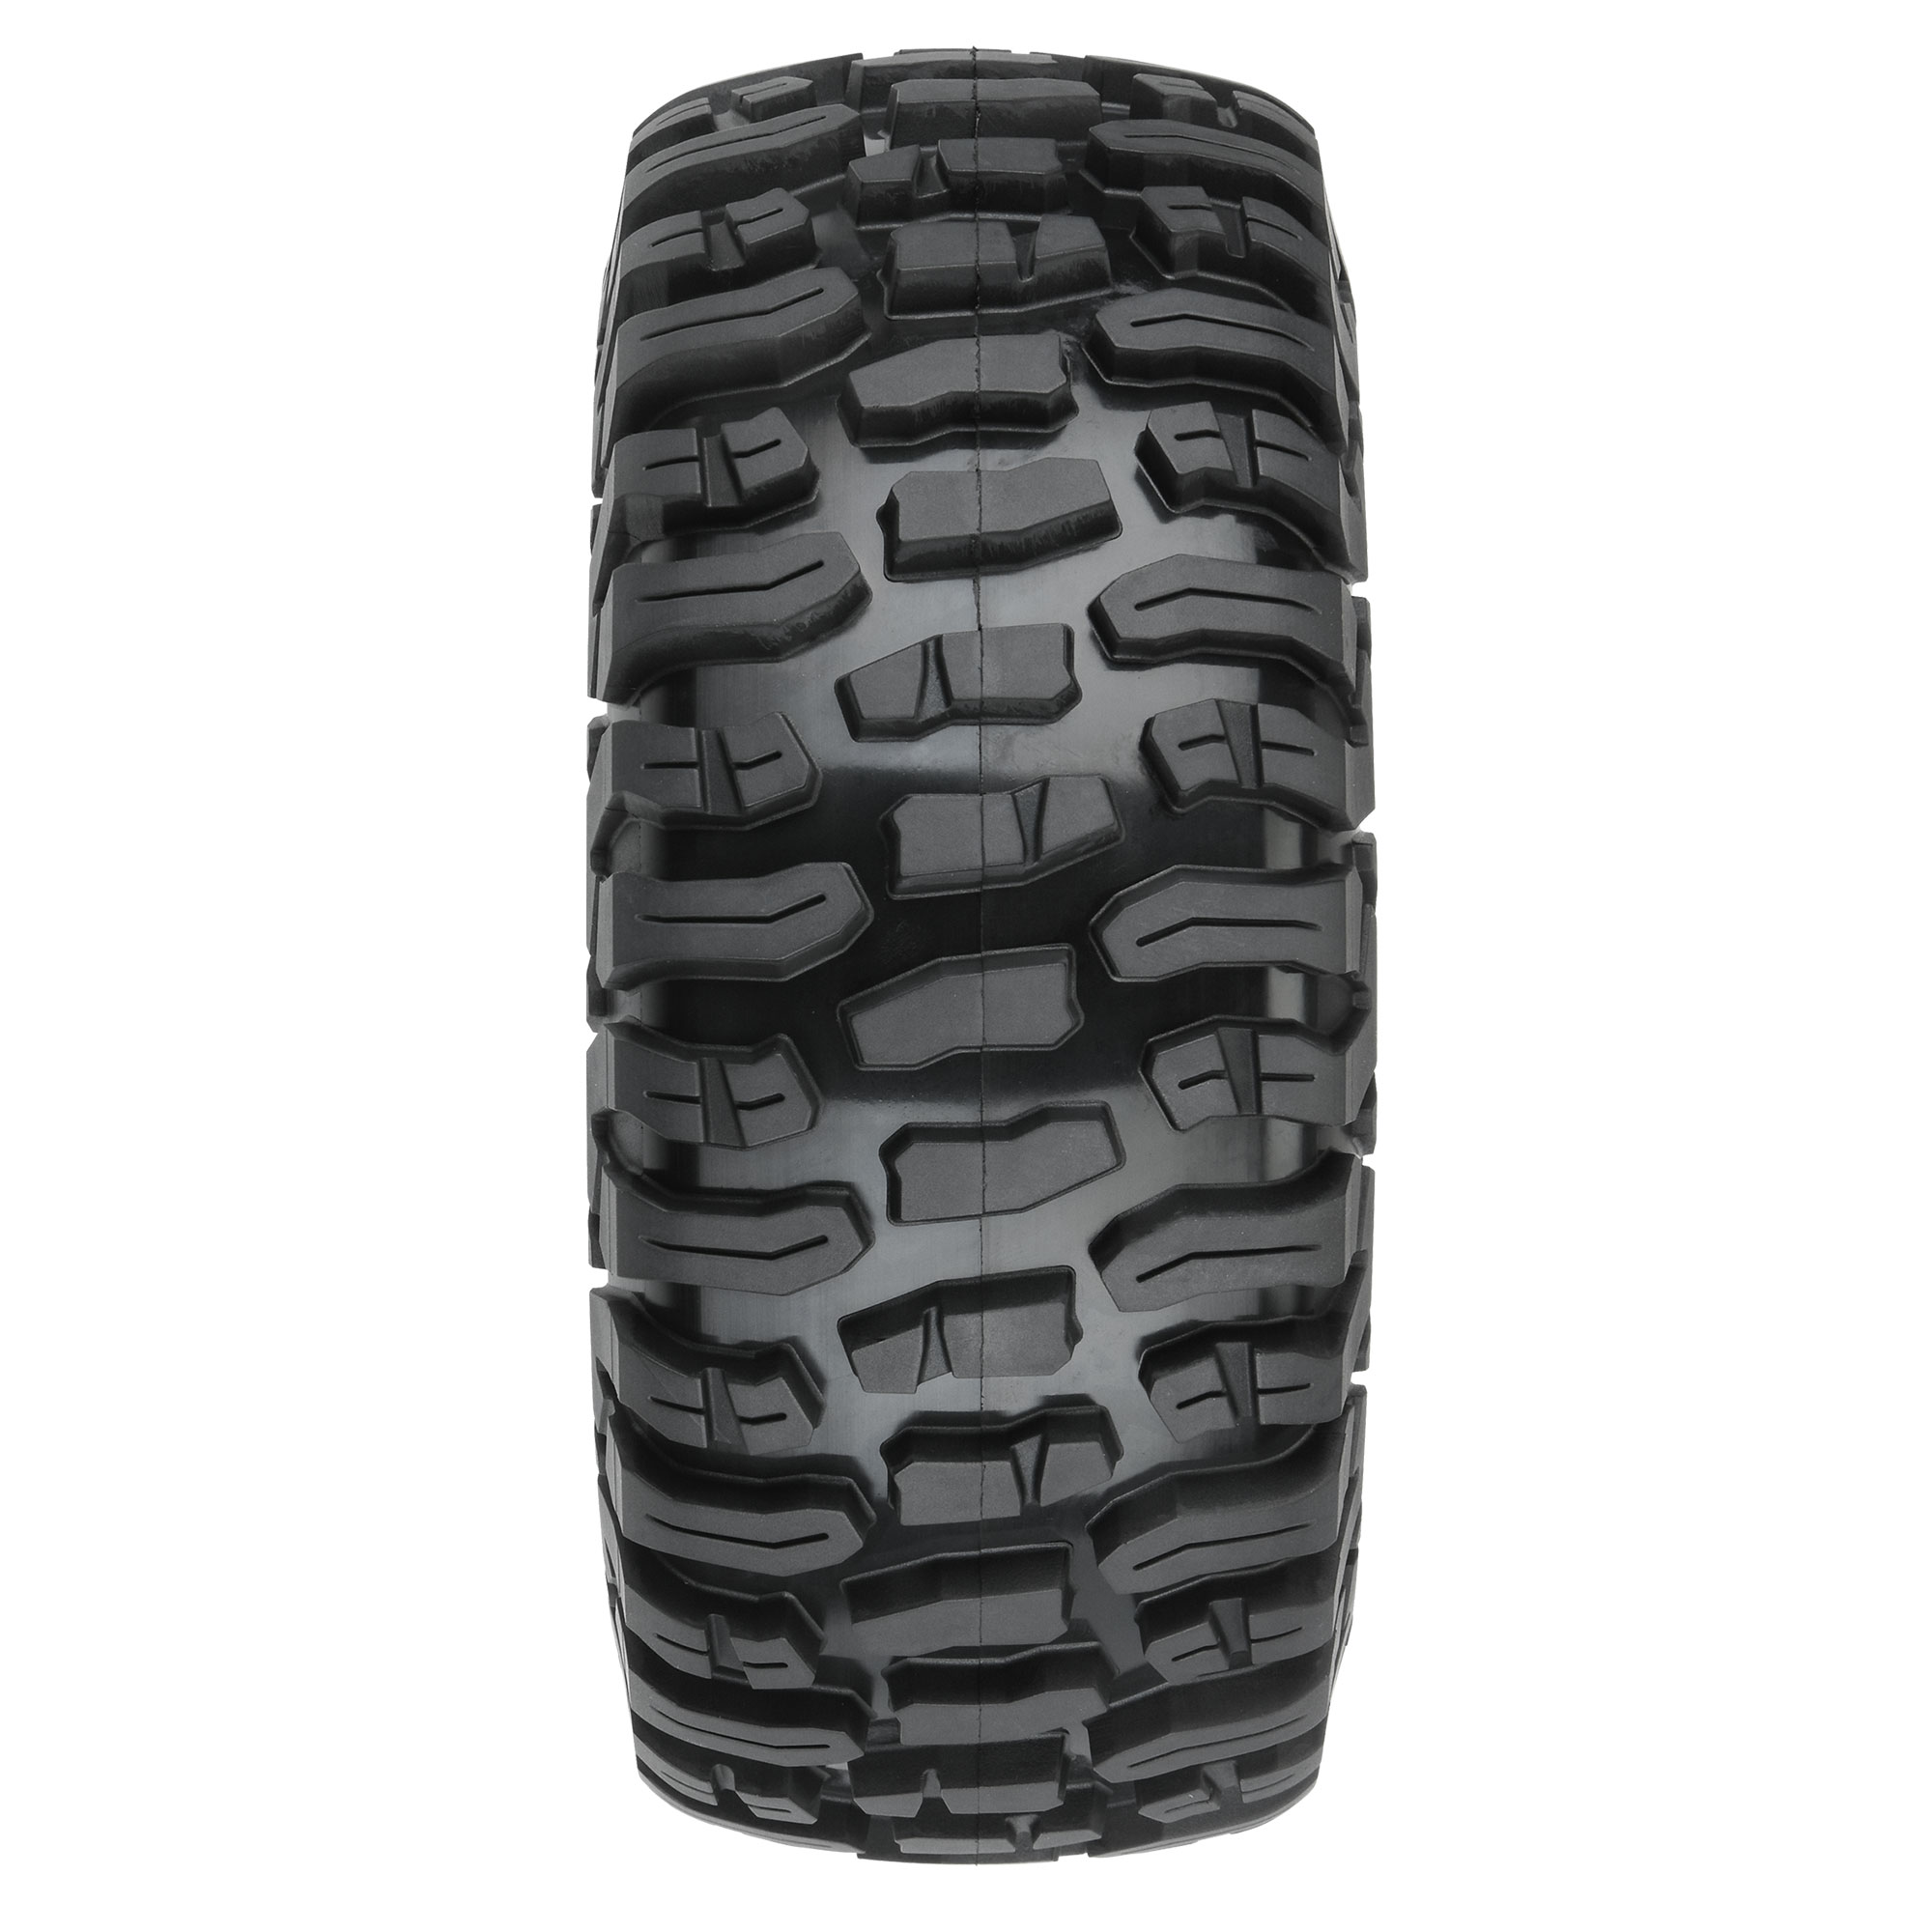 1/6 Fossil Front/Rear 2.9" Crawler Tires (2): SCX6